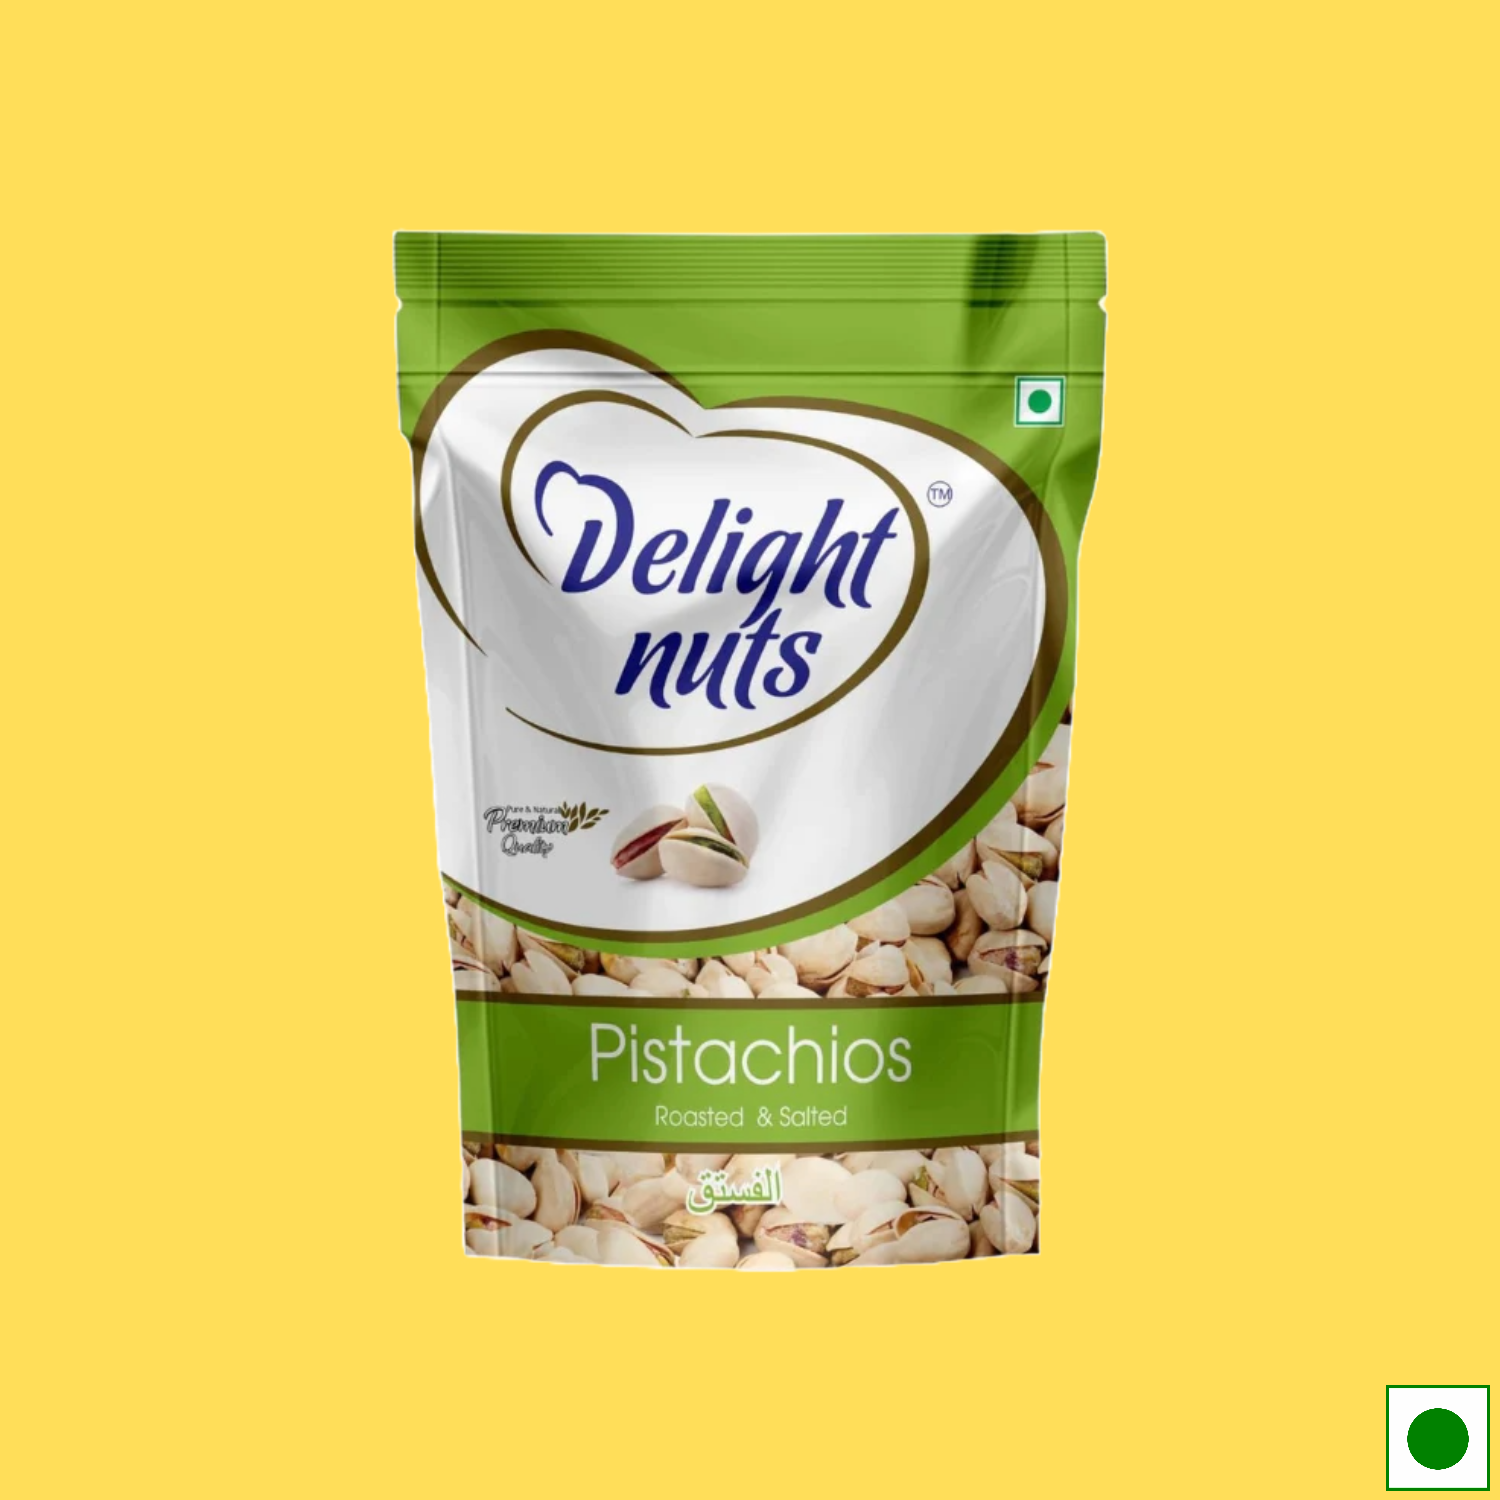 Delight Nuts Pistachios Roasted & Salted, 200g